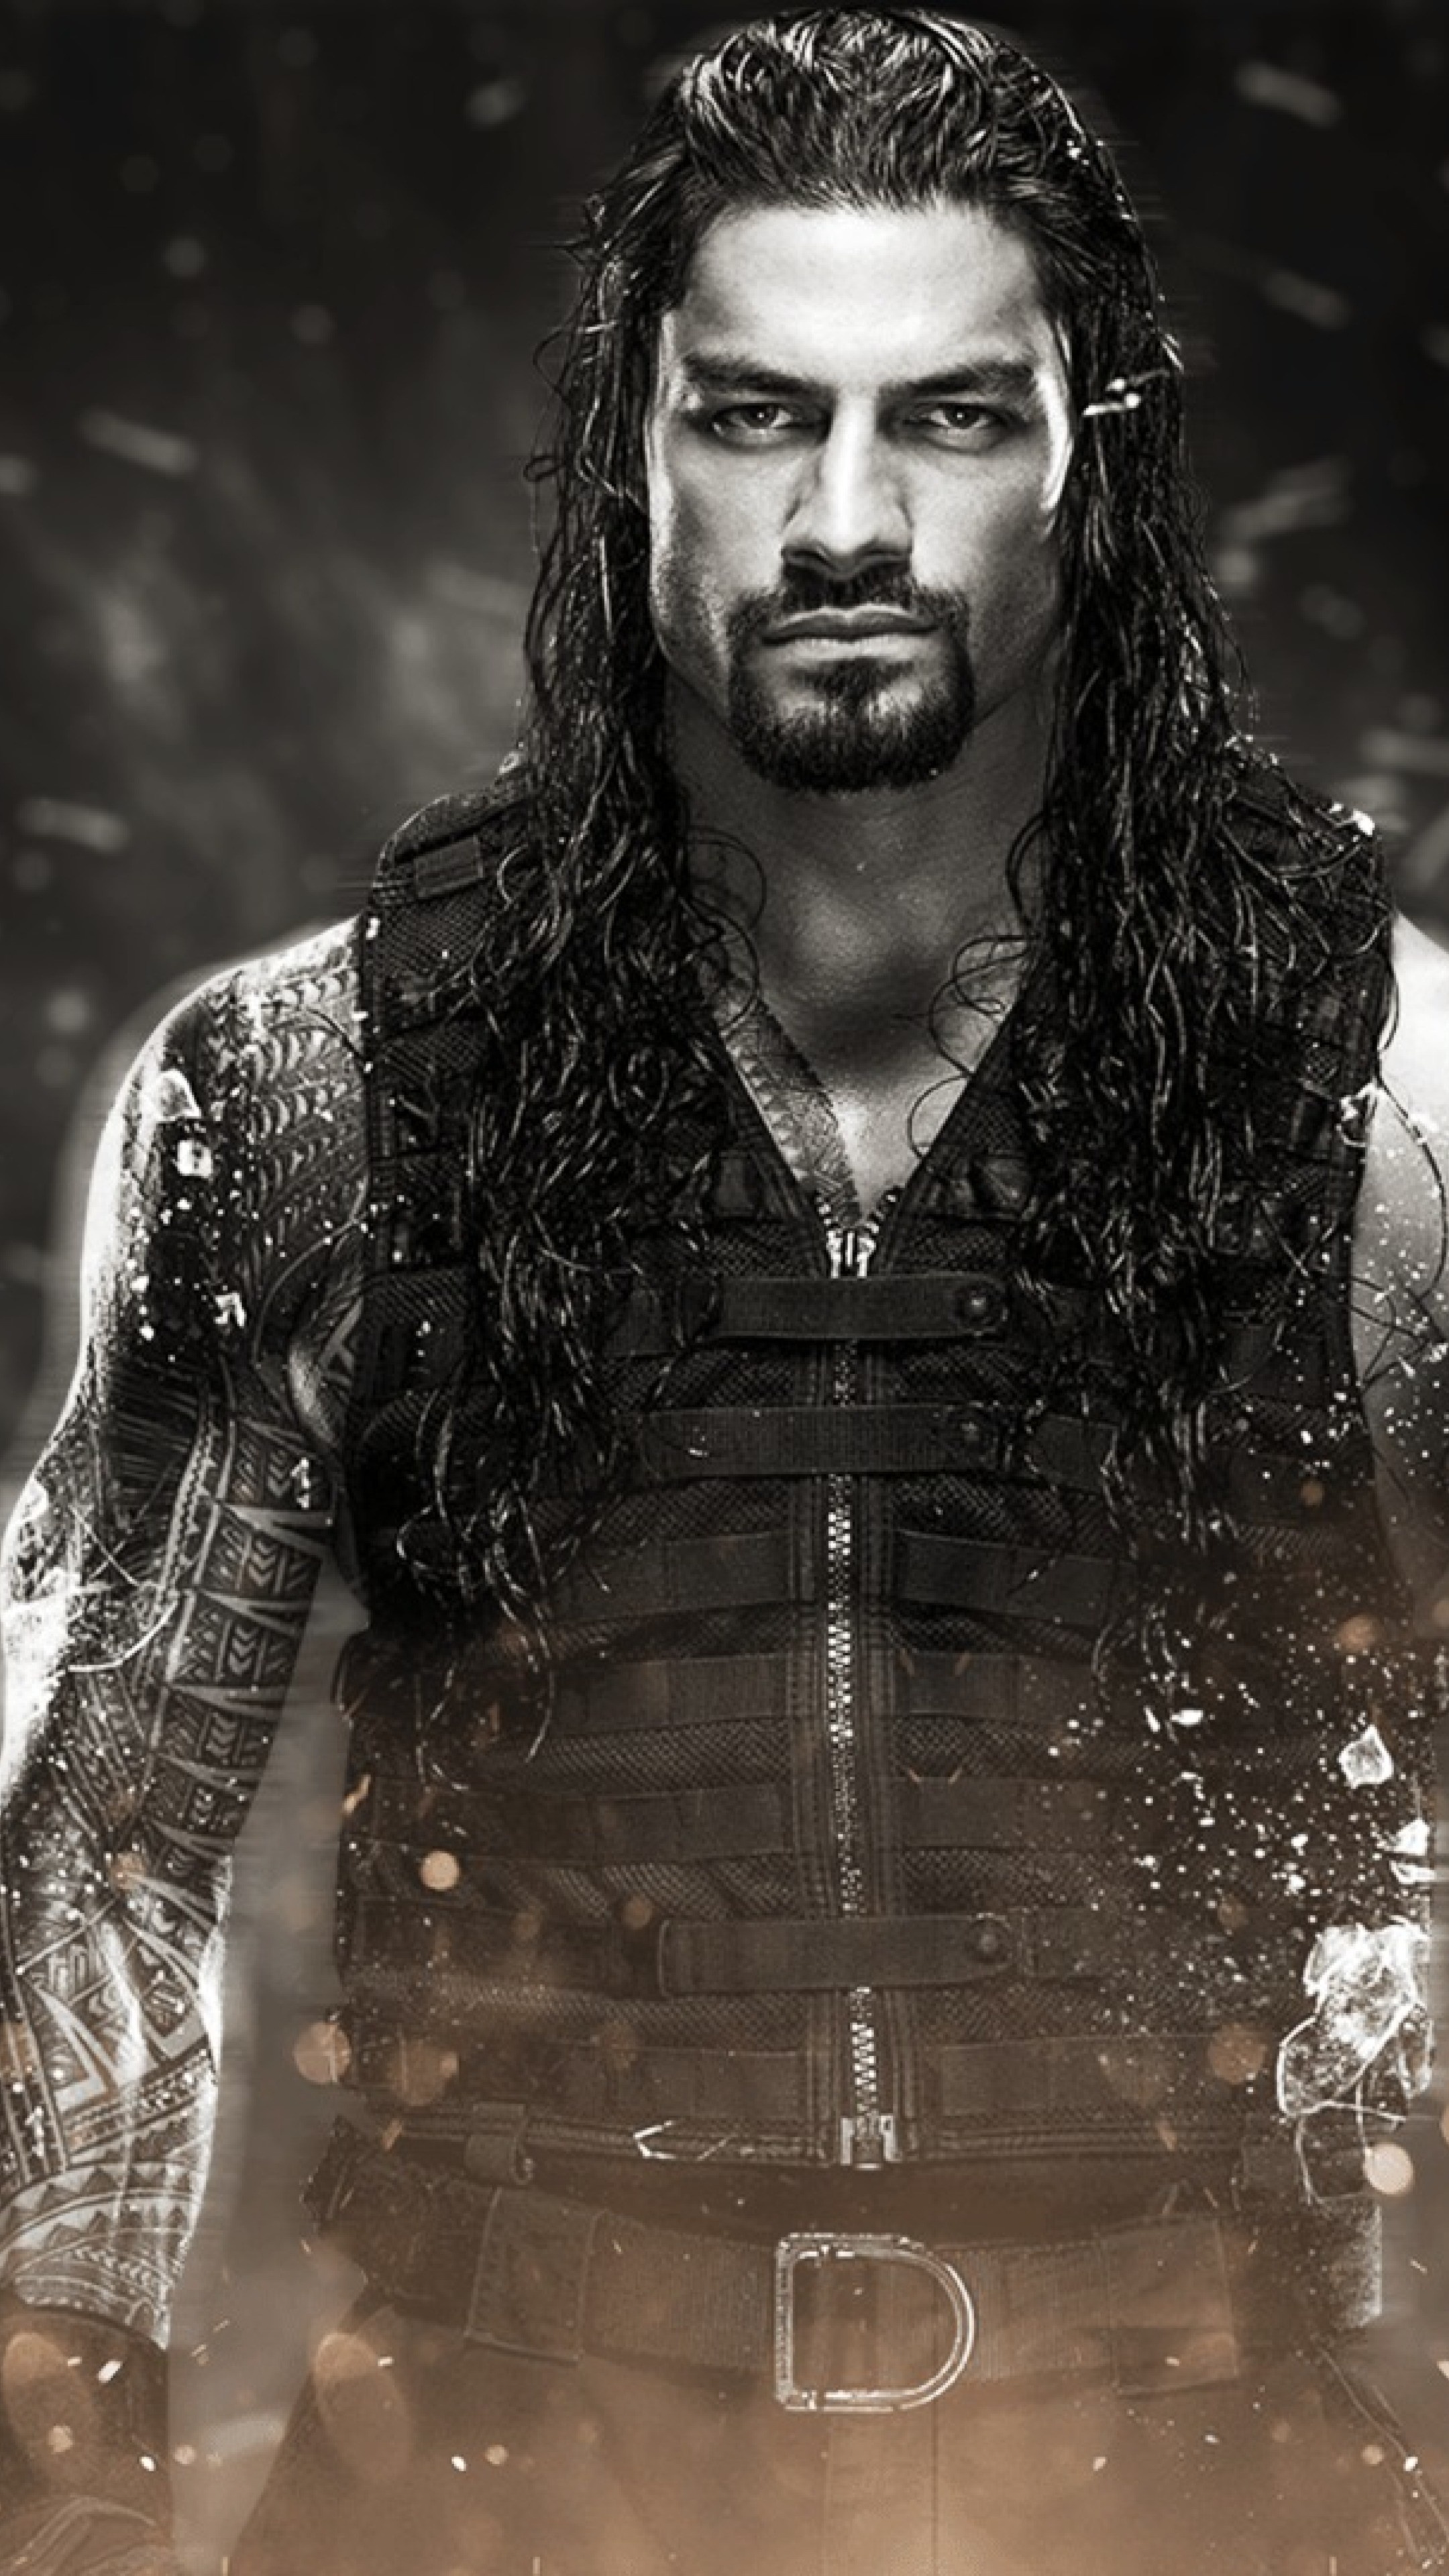 Roman Reigns wallpapers, Reigns' dominance, Powerful presence, Wrestling supremacy, 2160x3840 4K Handy